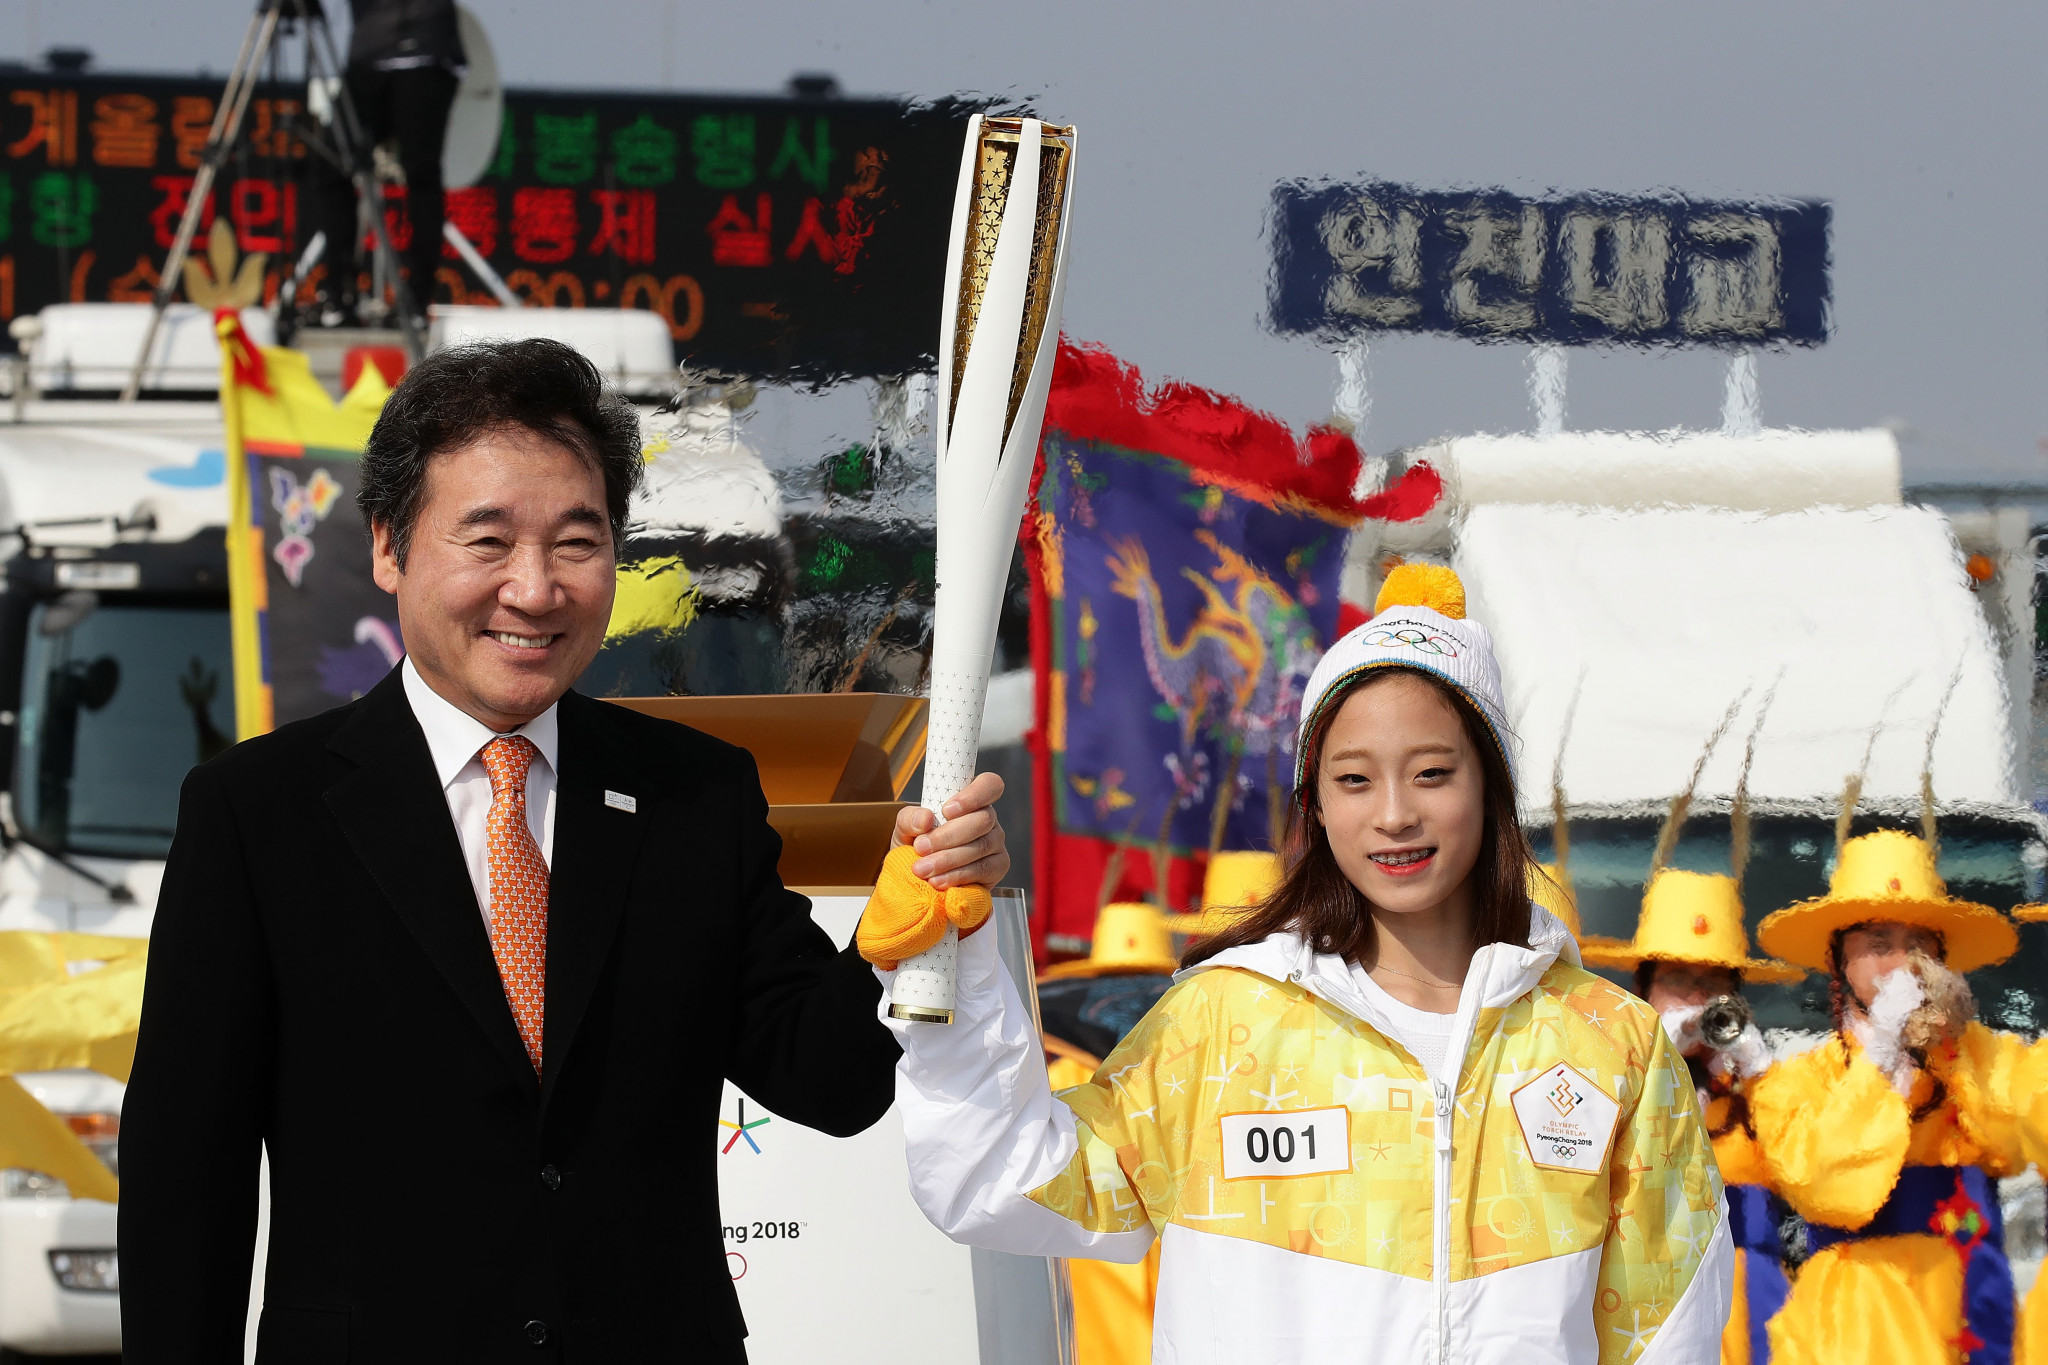 South Korean Prime Minister believes around 500 North Koreans could attend Winter Olympics